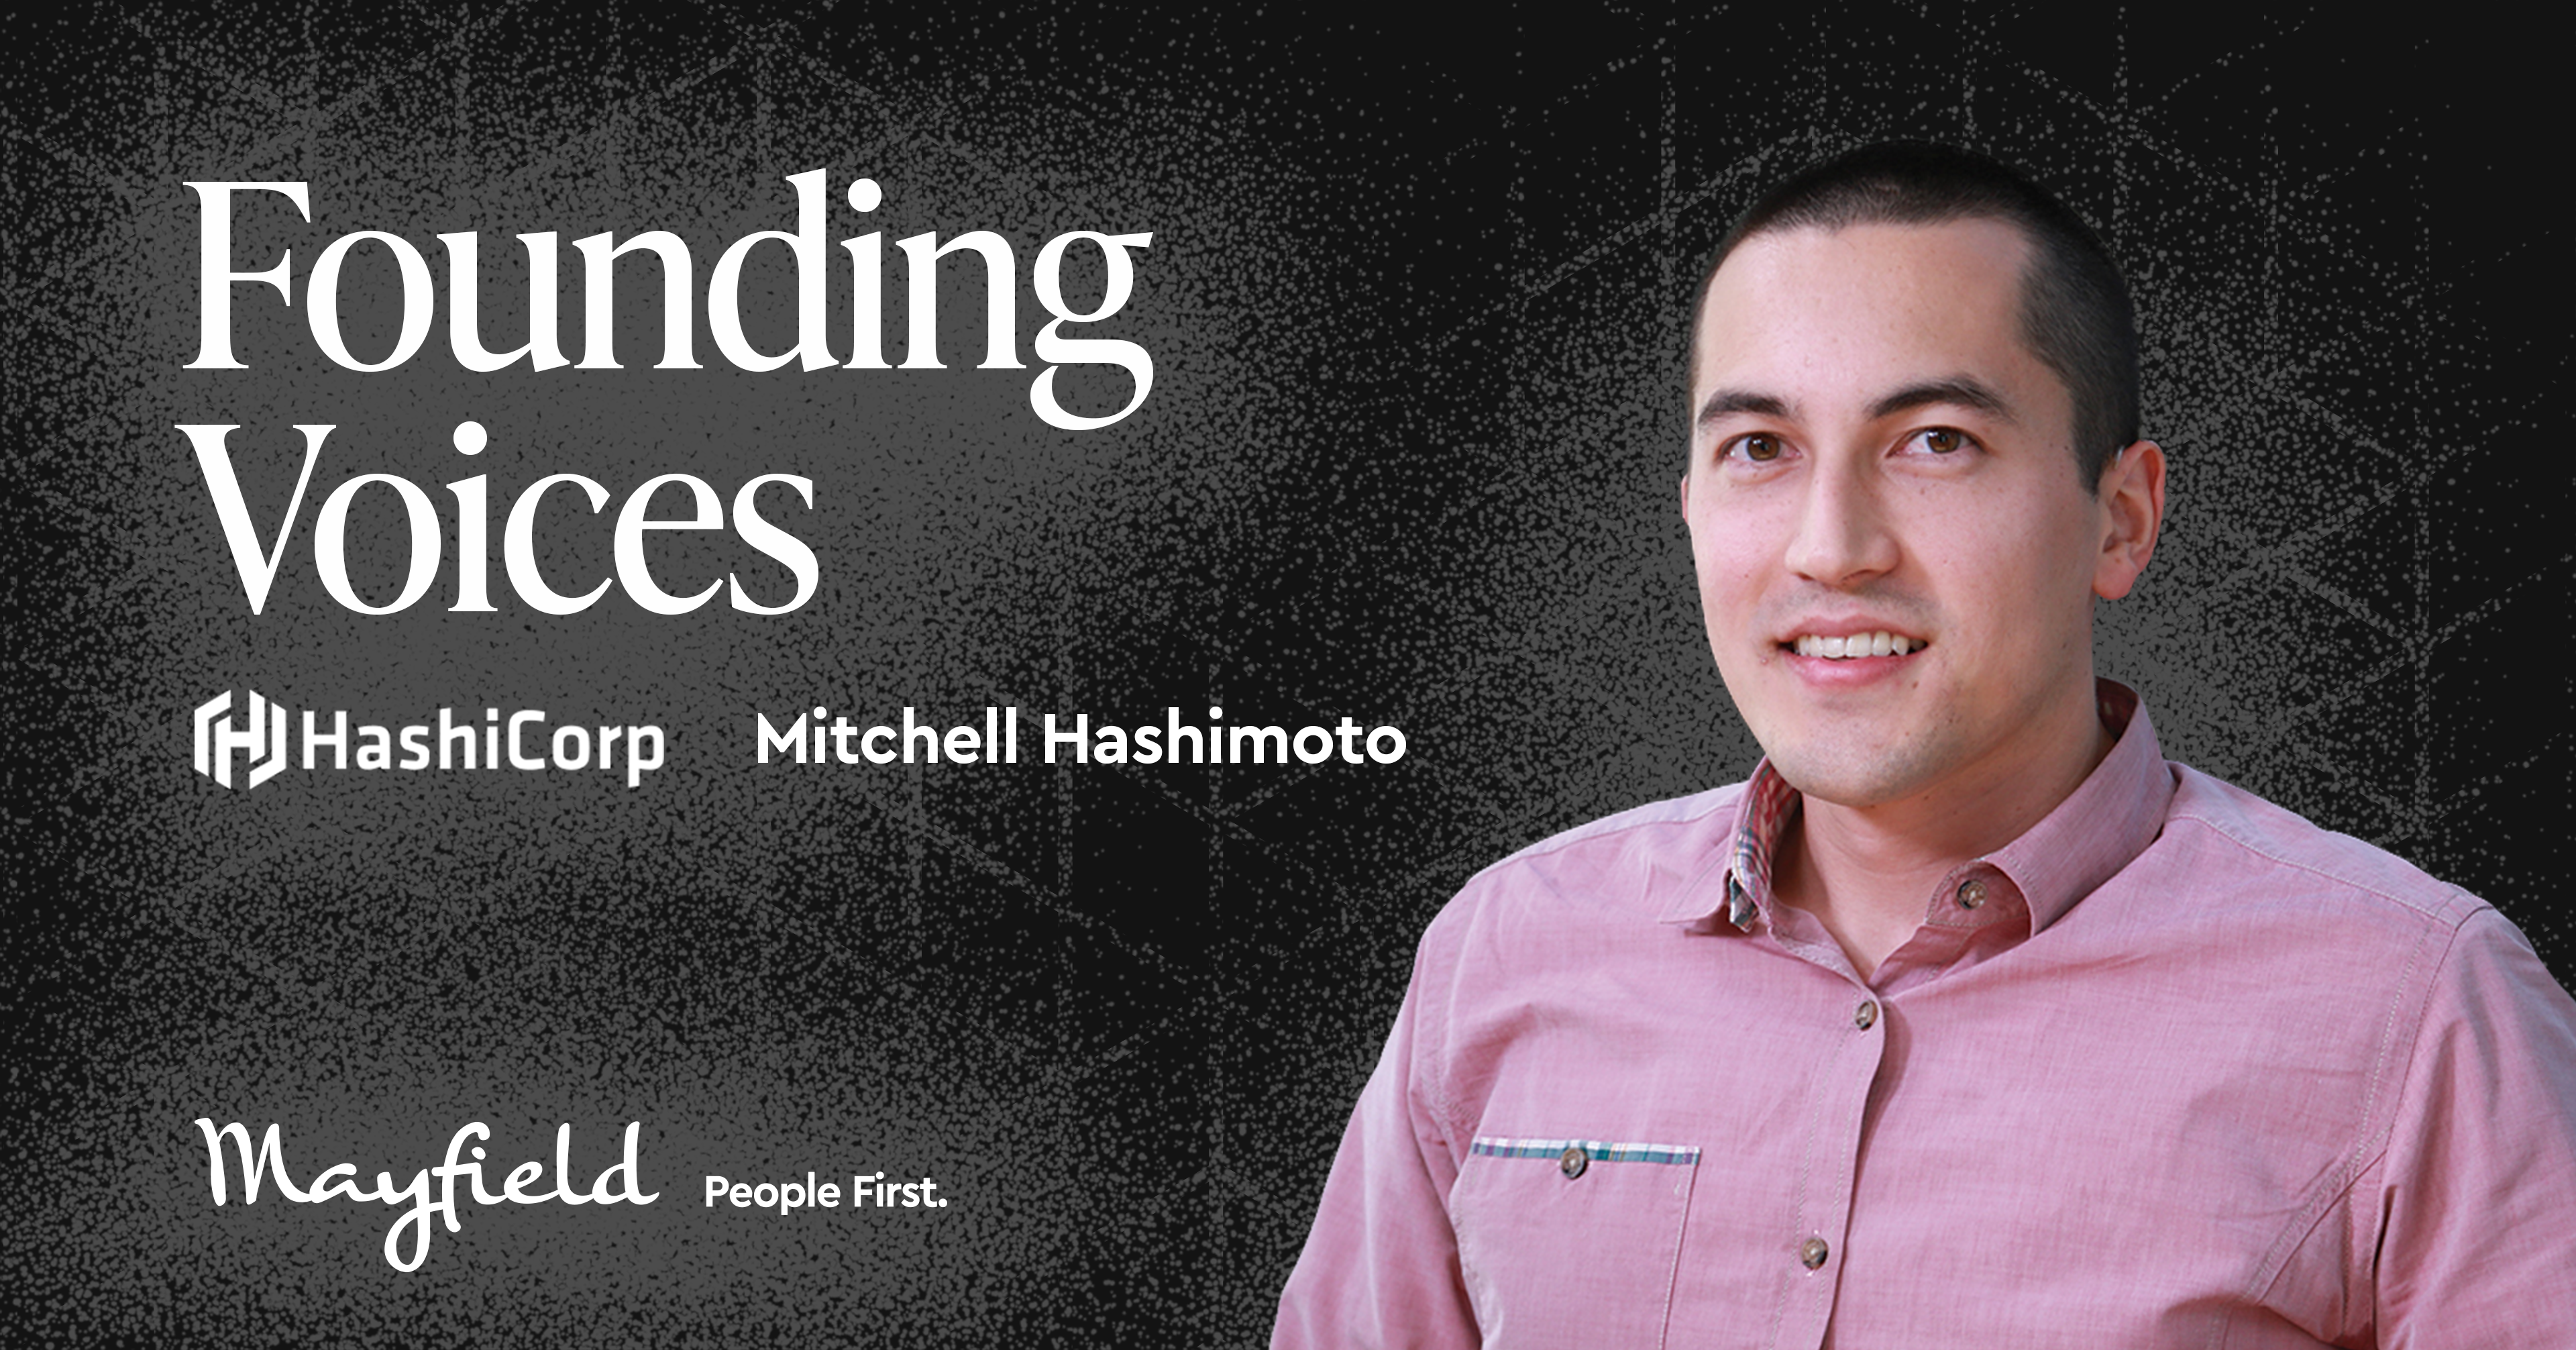 Founding Voices: Know the Story Behind the Product